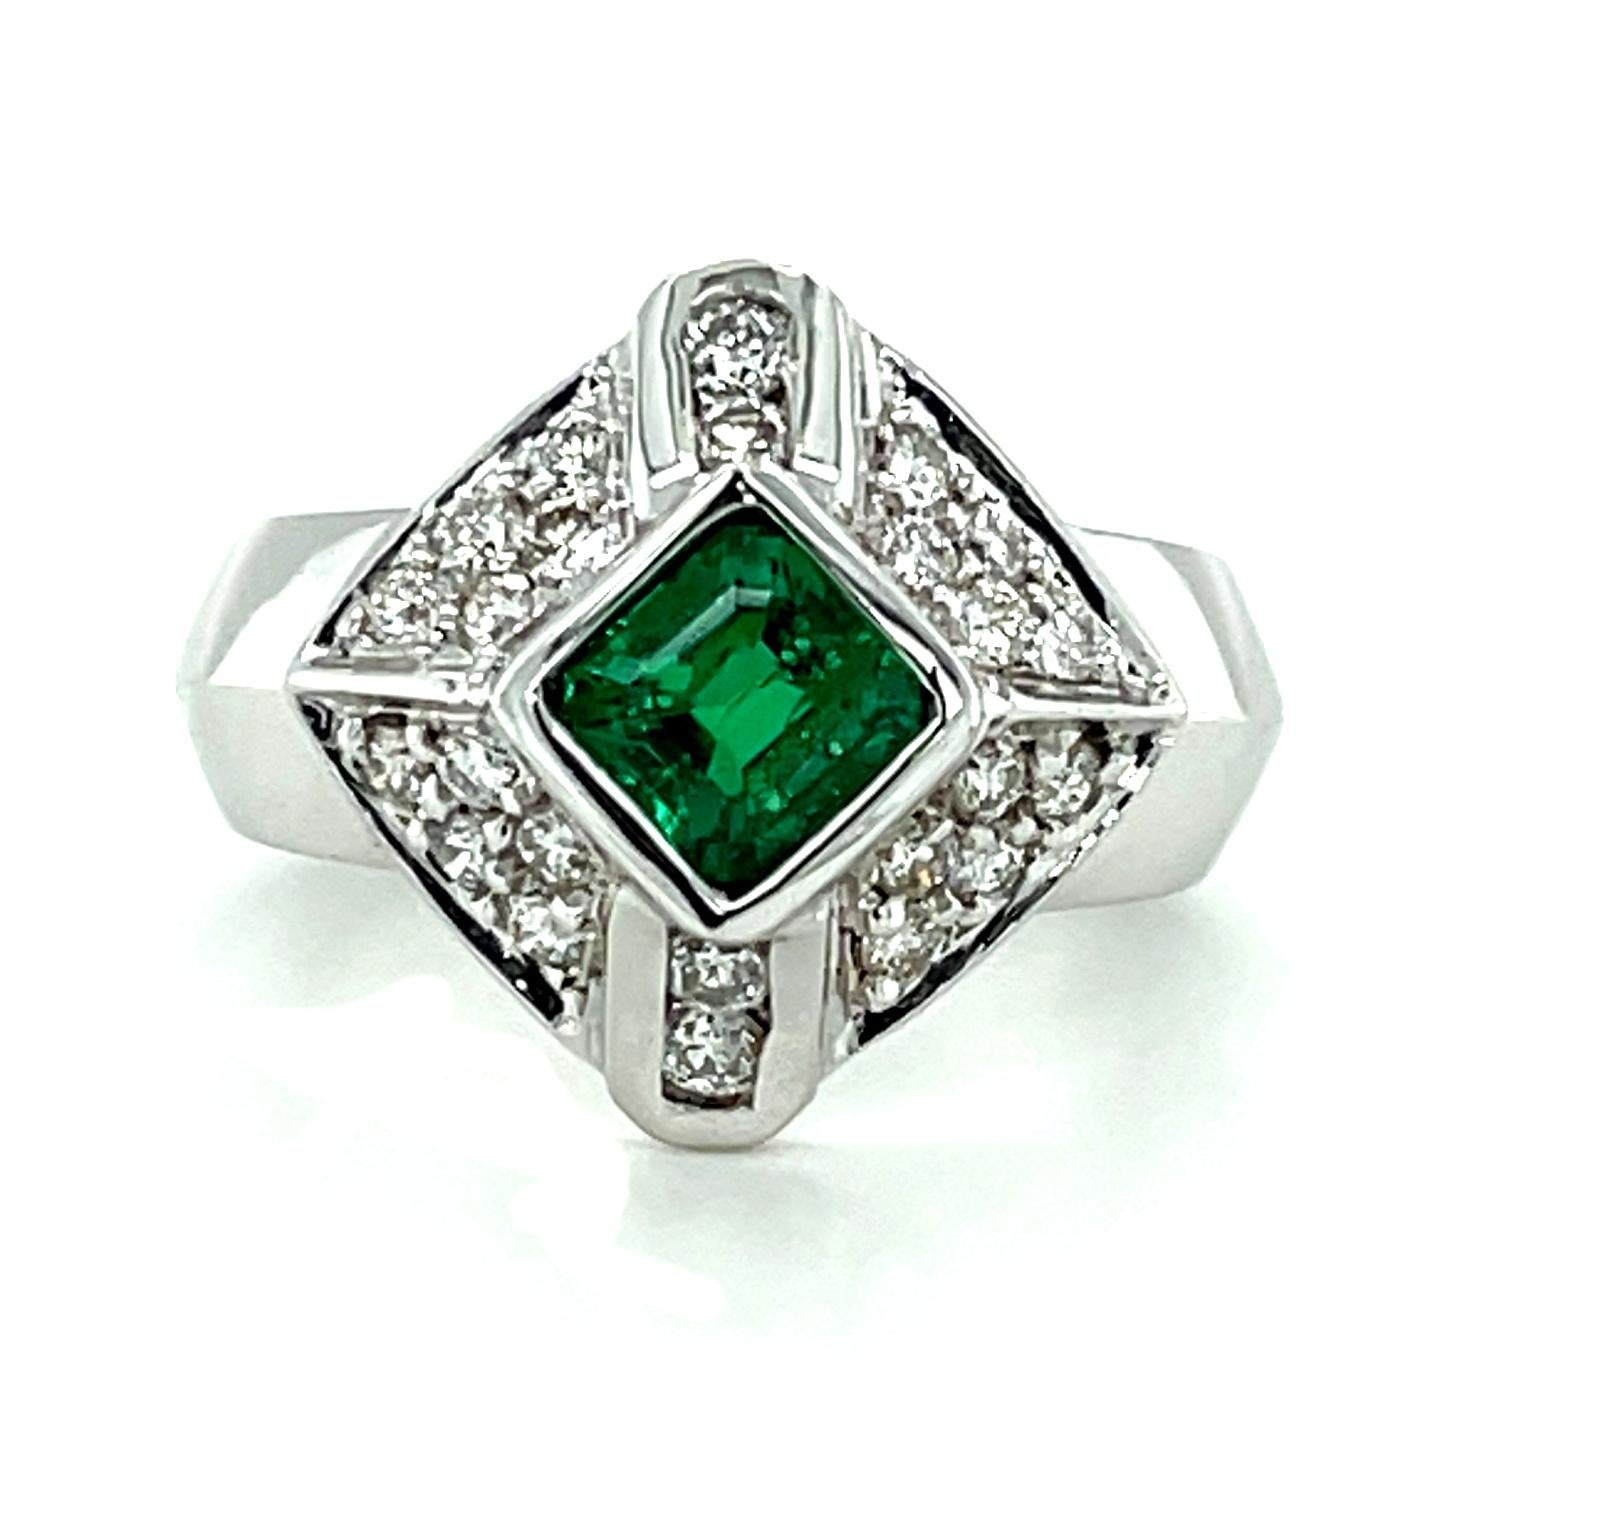 Reminiscent of the Art Deco period and timeless in design, this emerald and diamond ring is simply dazzling! The center emerald weighs .67 carat and is a top quality, vibrant, rich green color. It has been set at an angle in a bright, high-polished